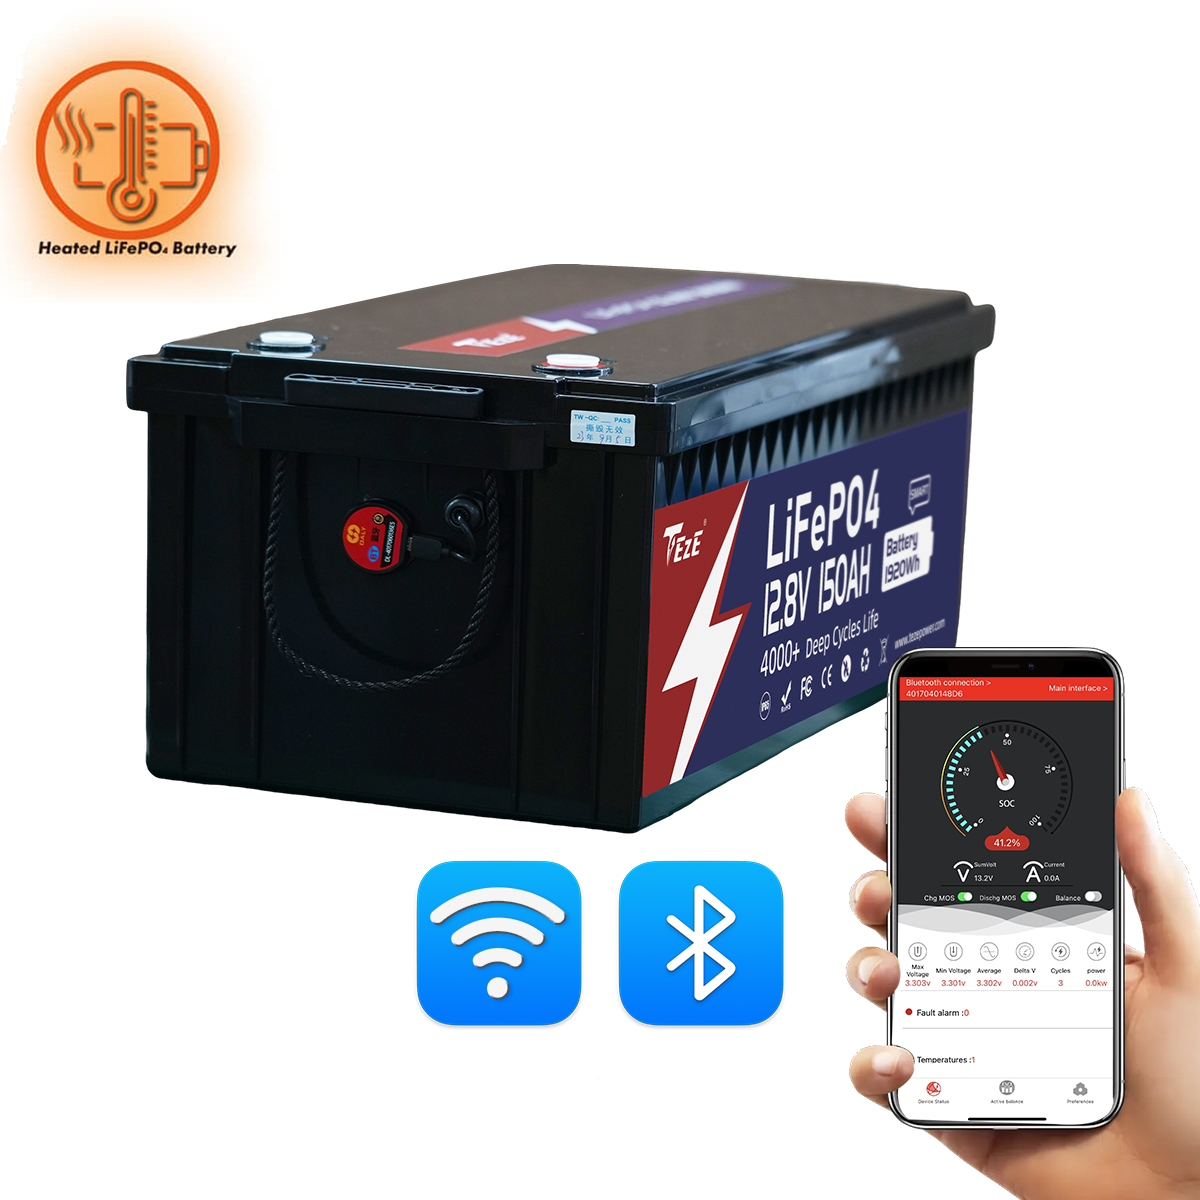 New Add WiFi-TezePower 12V 150Ah LiFePO4 Battery with WiFi and Bluetooth, Self-heating and Active Balancer, Built-in 150A Daly BMS(WiFi External Version)-TezePower